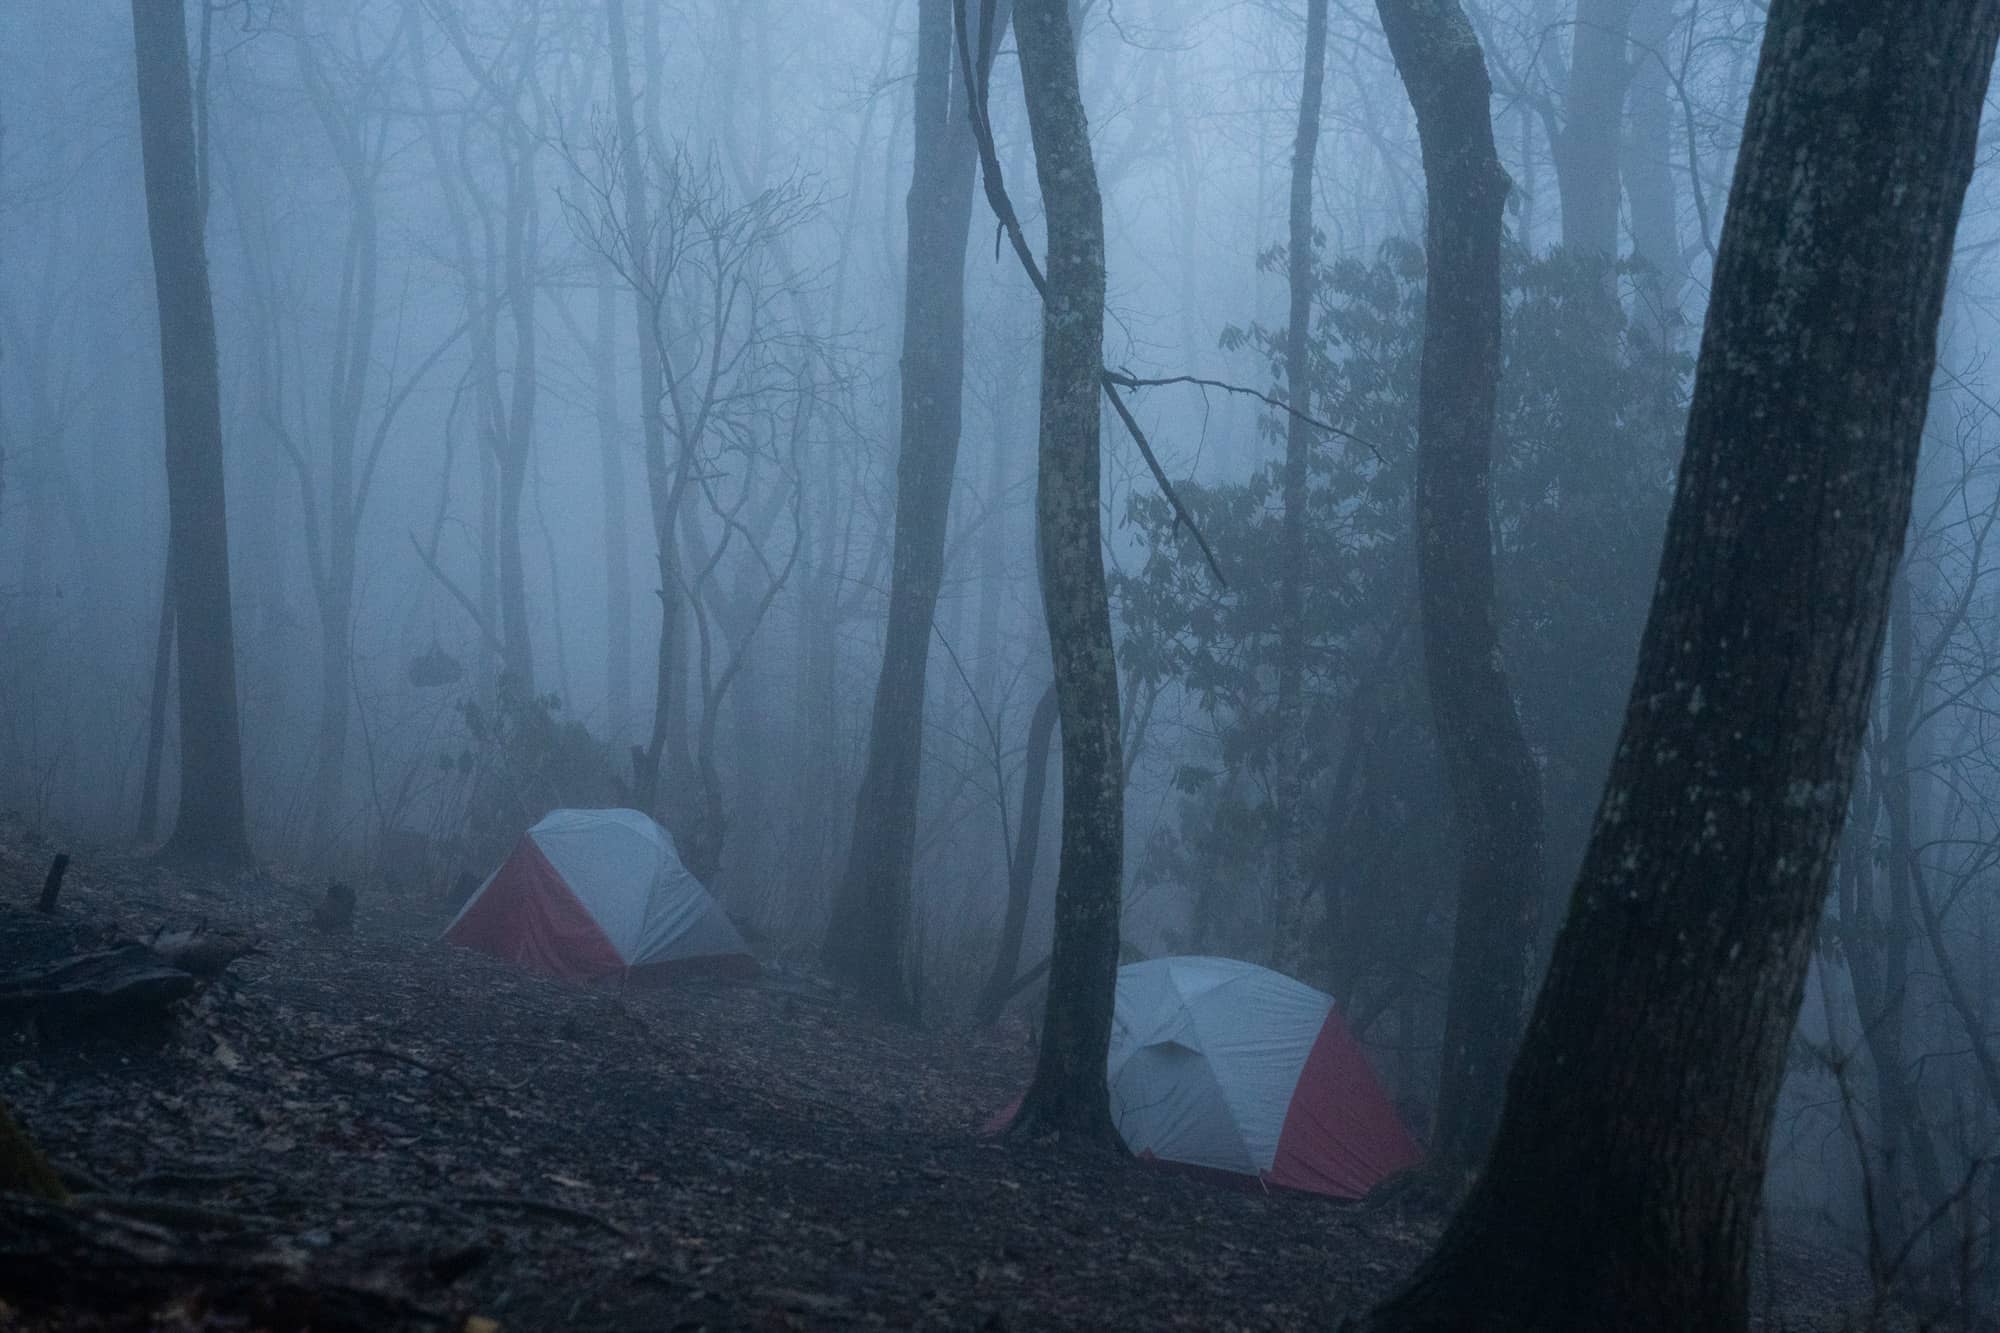 Ohio University students tents stand tall in the rain during the fourth day backpacking a section of the Appalachian Trail in the Nantahala National Forest on Tuesday, March 8, 2022, at the Wayah Bald Shelter near Franklin, North Carolina.